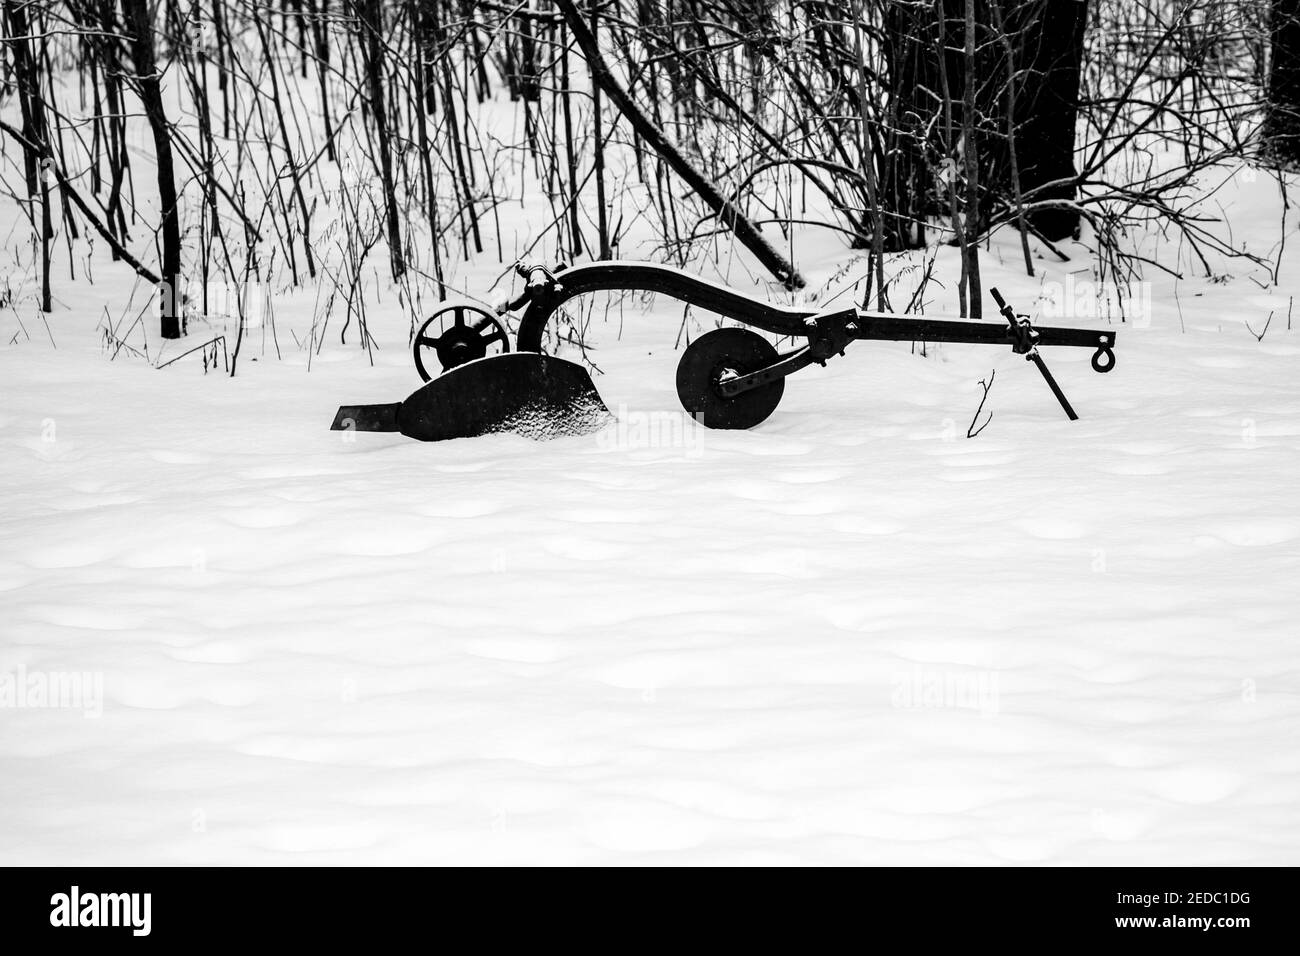 Snow covered antique plow next to a Wisconsin forest in winter, B&W horizontal Stock Photo